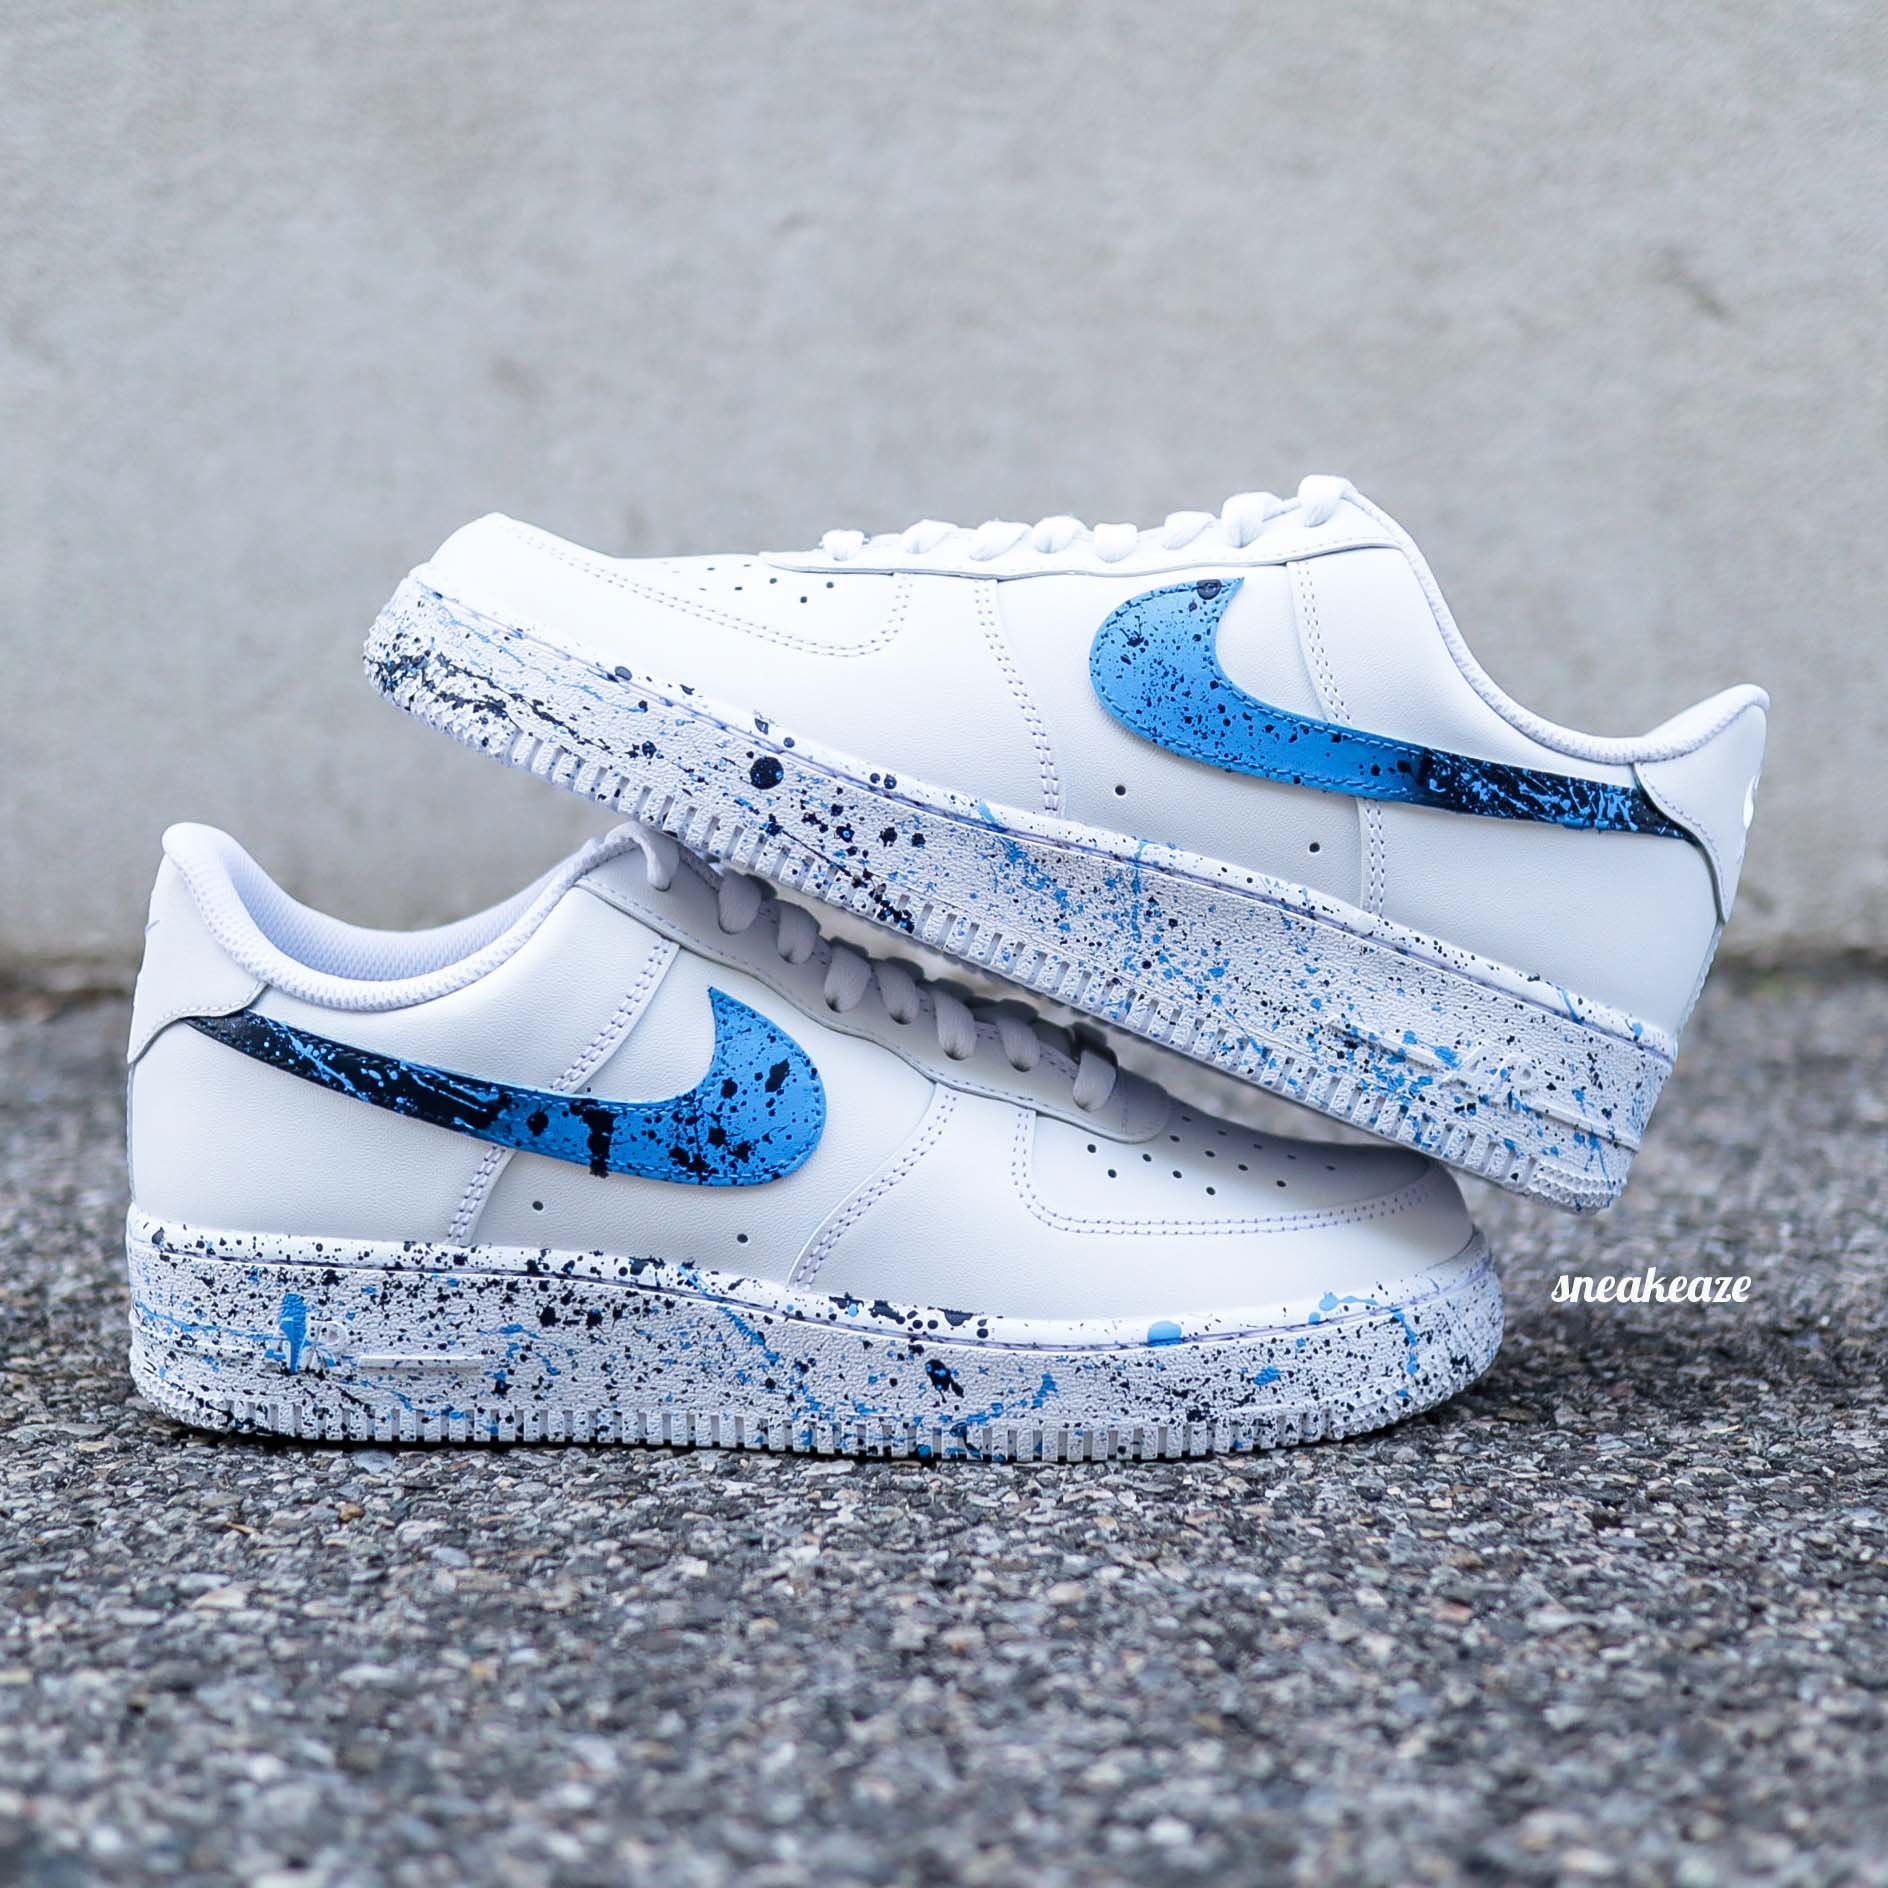 Nike Air Force 1 Low White Custom splatter paint shoes (Gray,Red,Black)